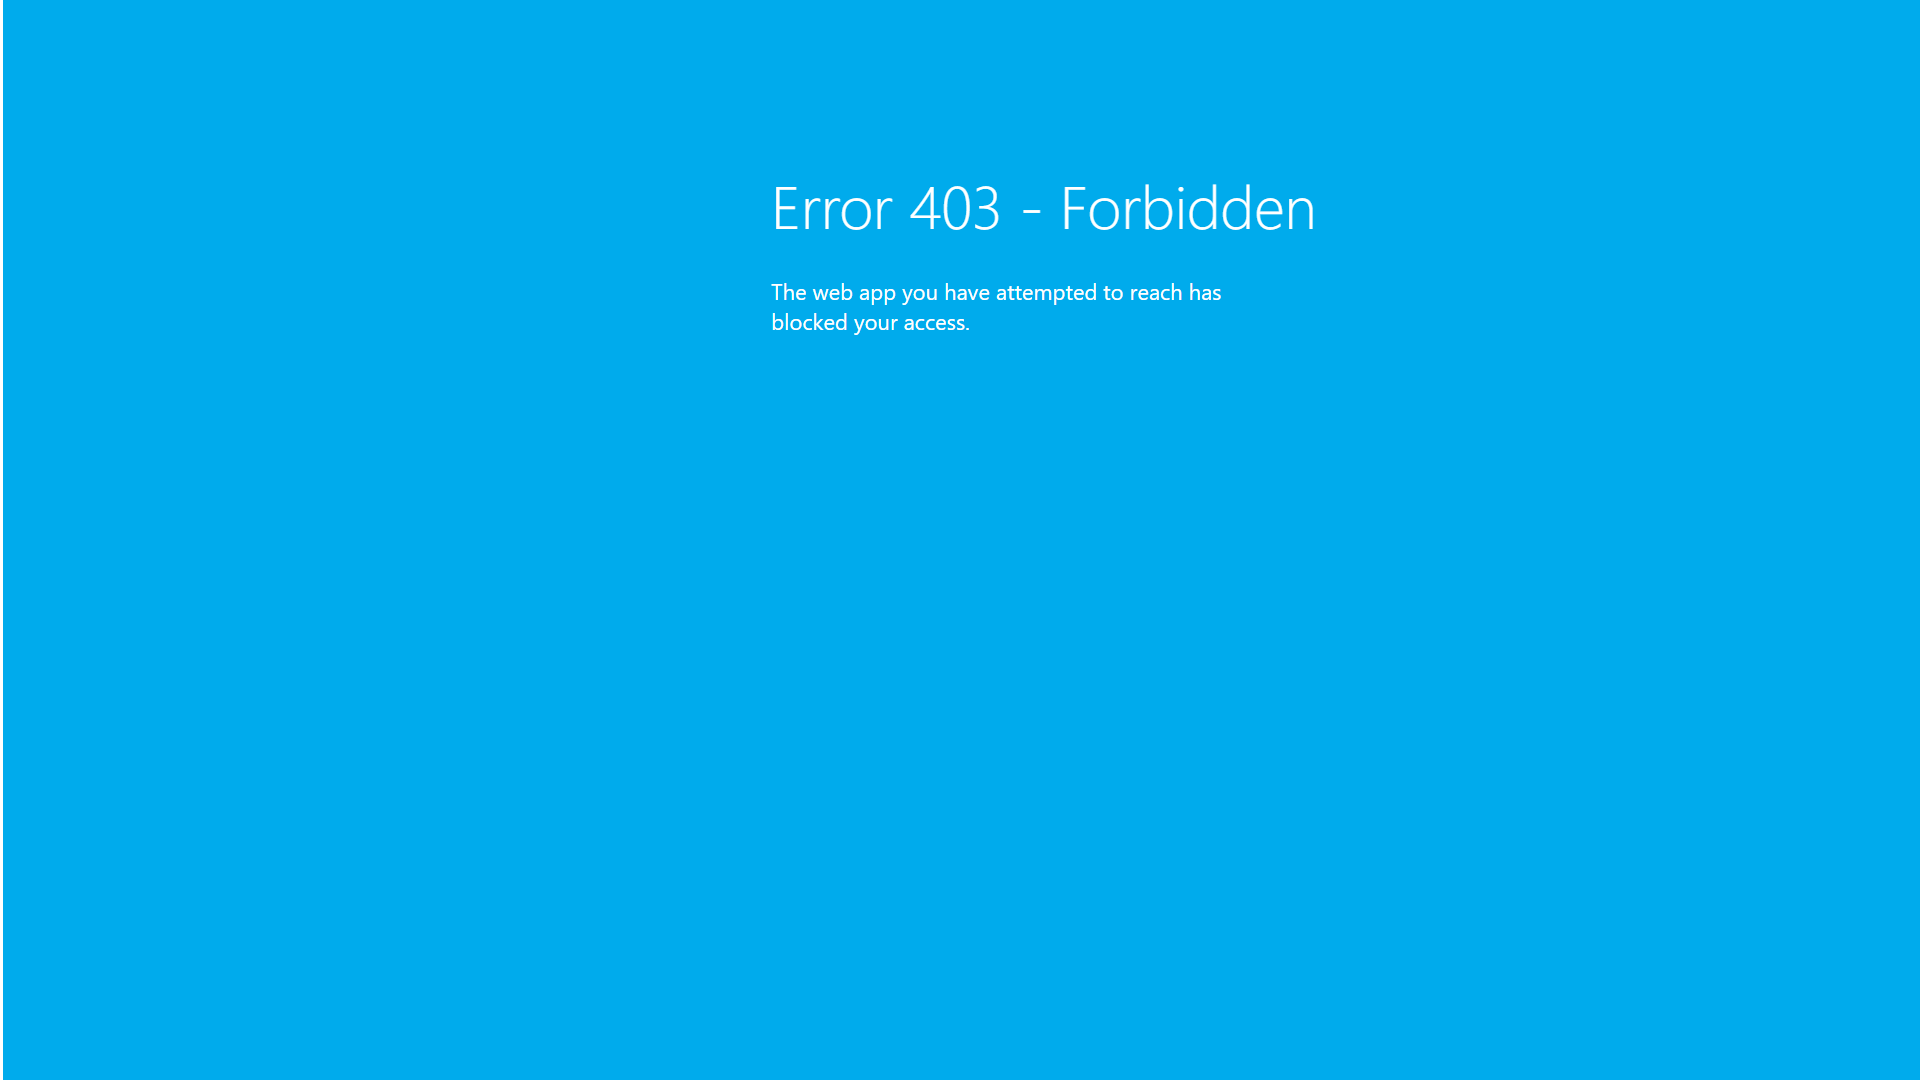 Screenshot showing the resulting Error 403 - Forbidden screen that is seen once the access restriction rules have been configured.